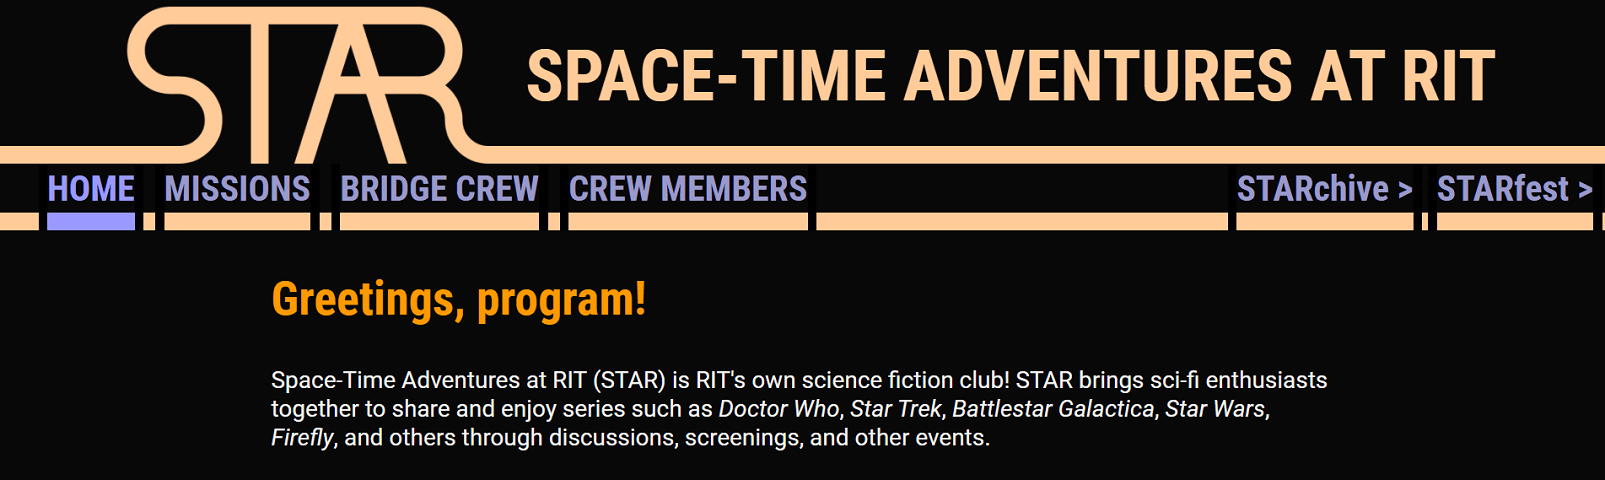 The header of the STAR website has the line on the right of the STAR logo extended across the page to form part of the LCARS-inspired interface.